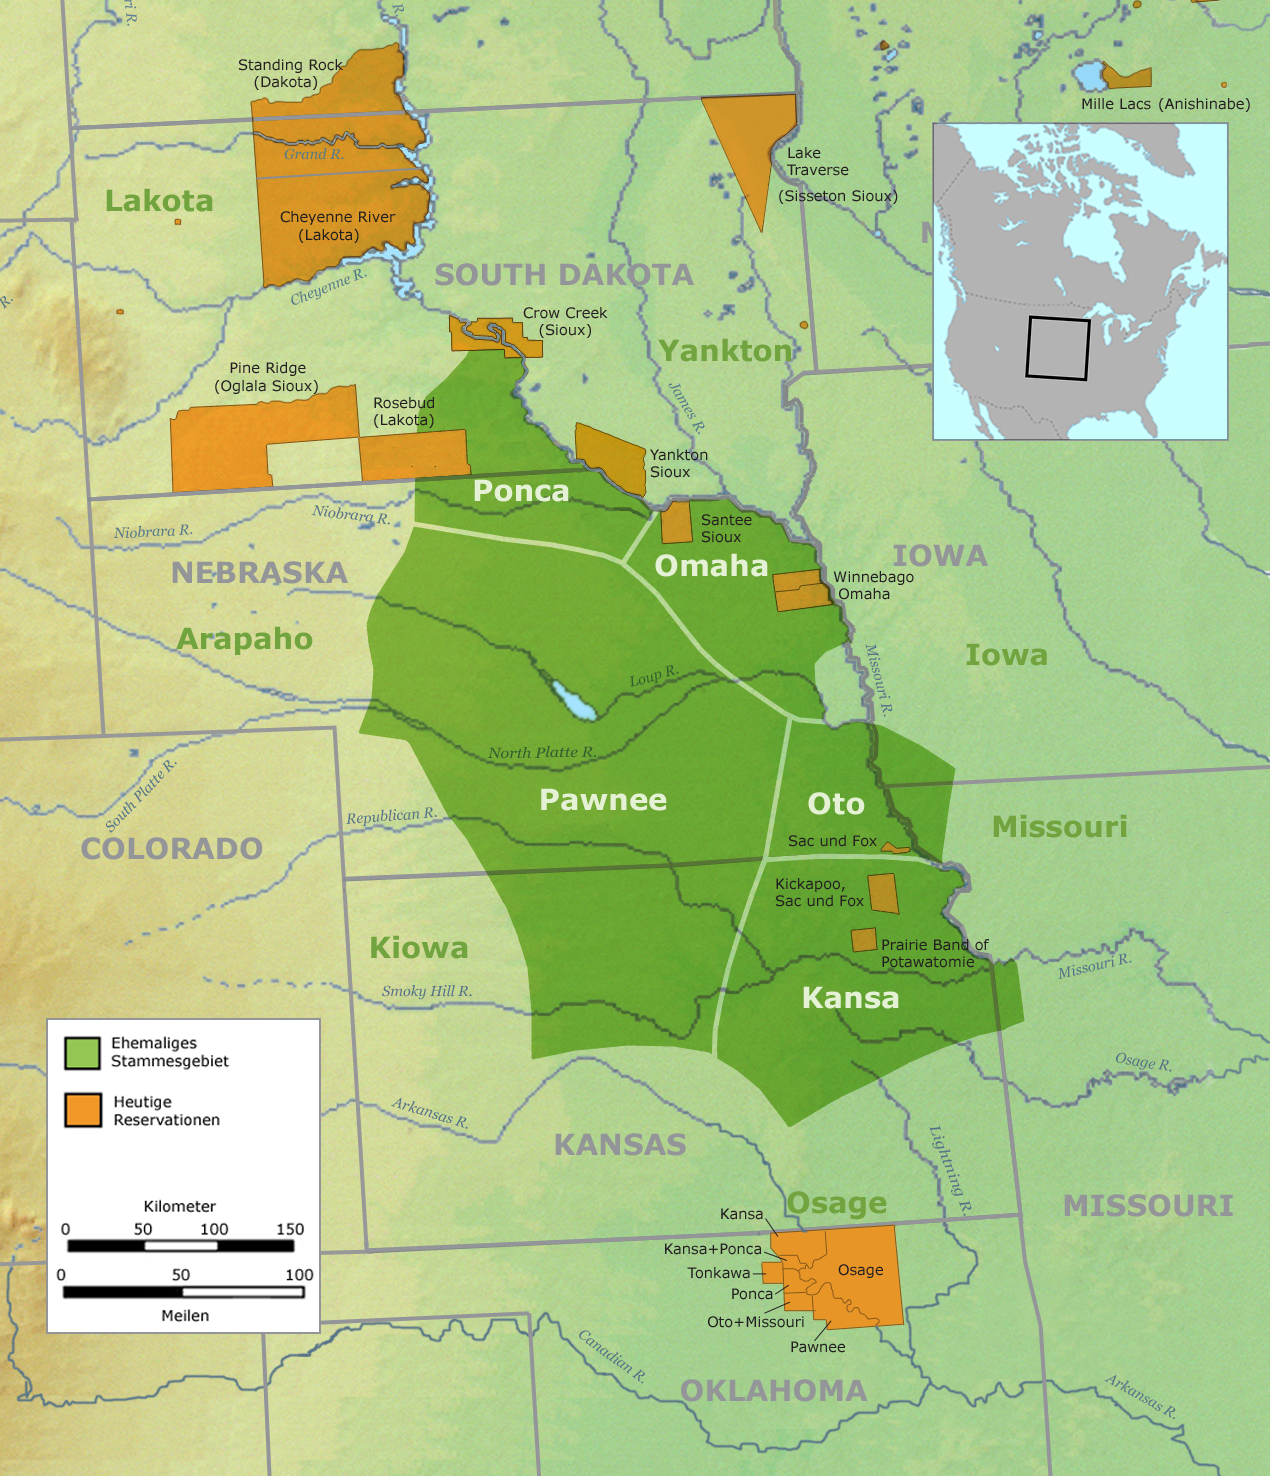 What Are the Great Plains and How Are They Being Protected?